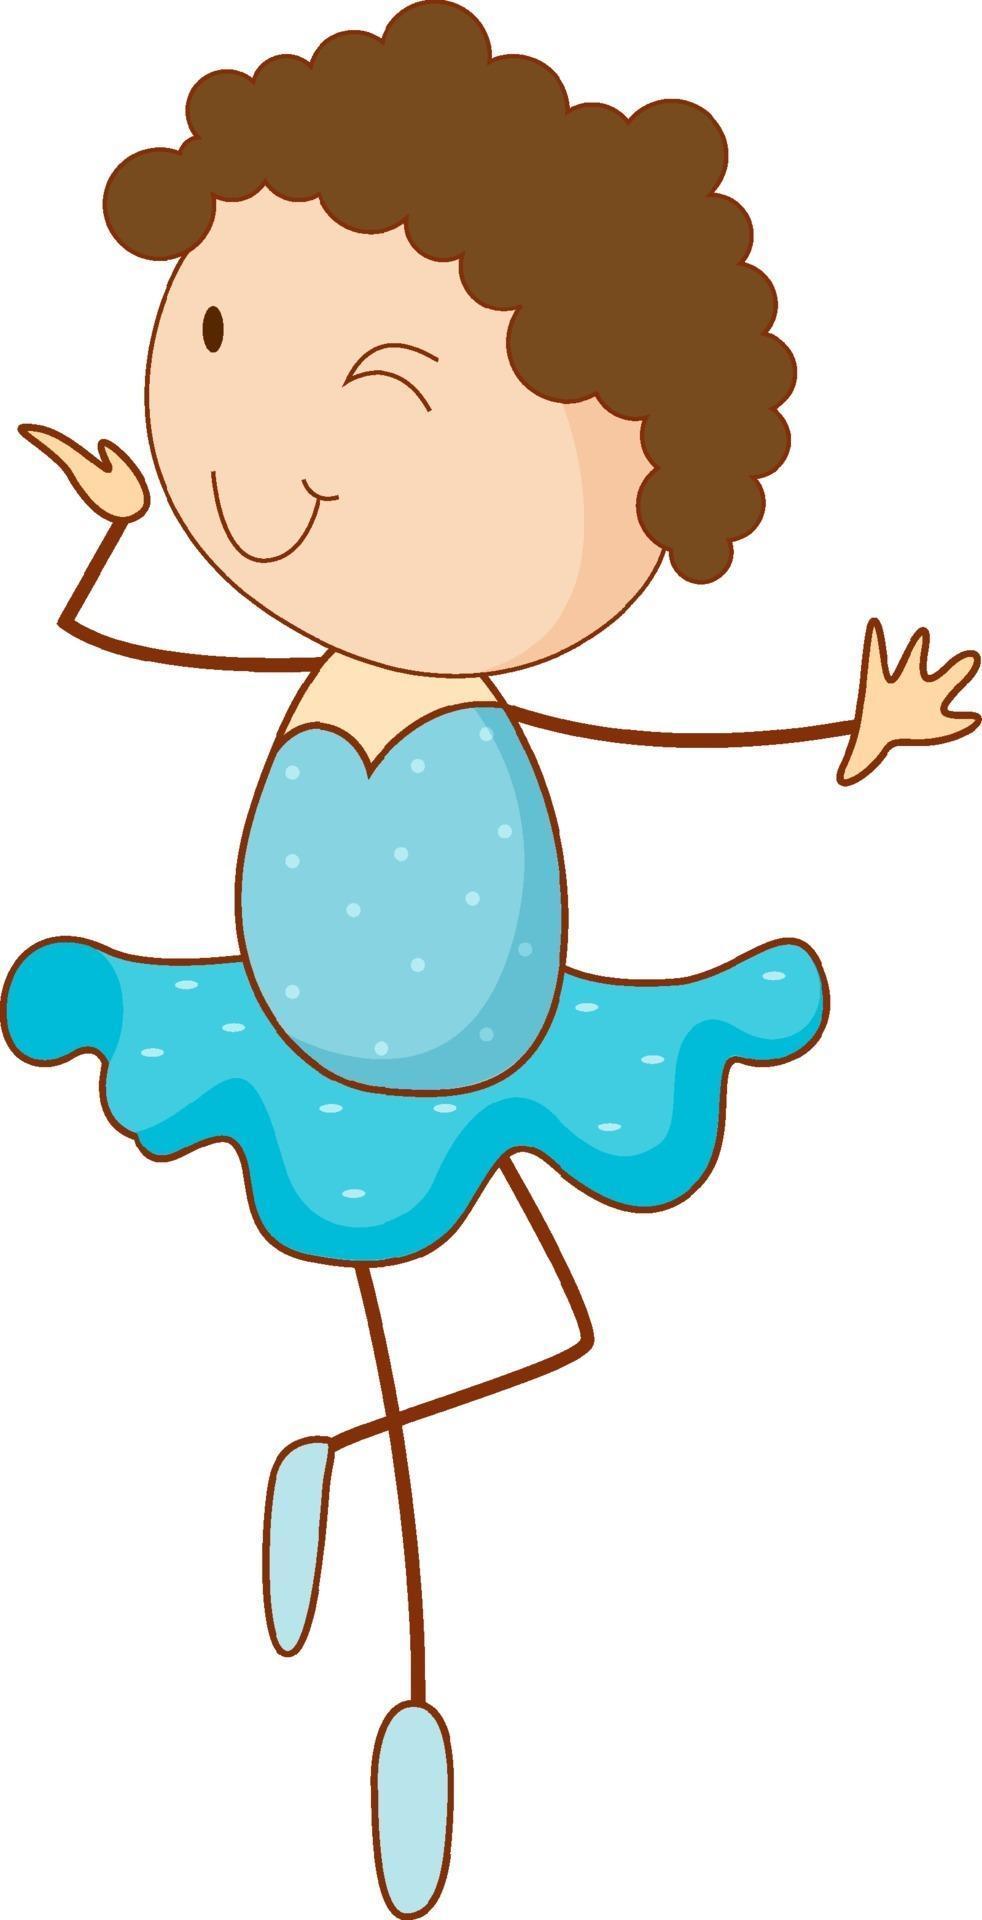 A doodle ballet dancer cartoon character isolated - Download Free